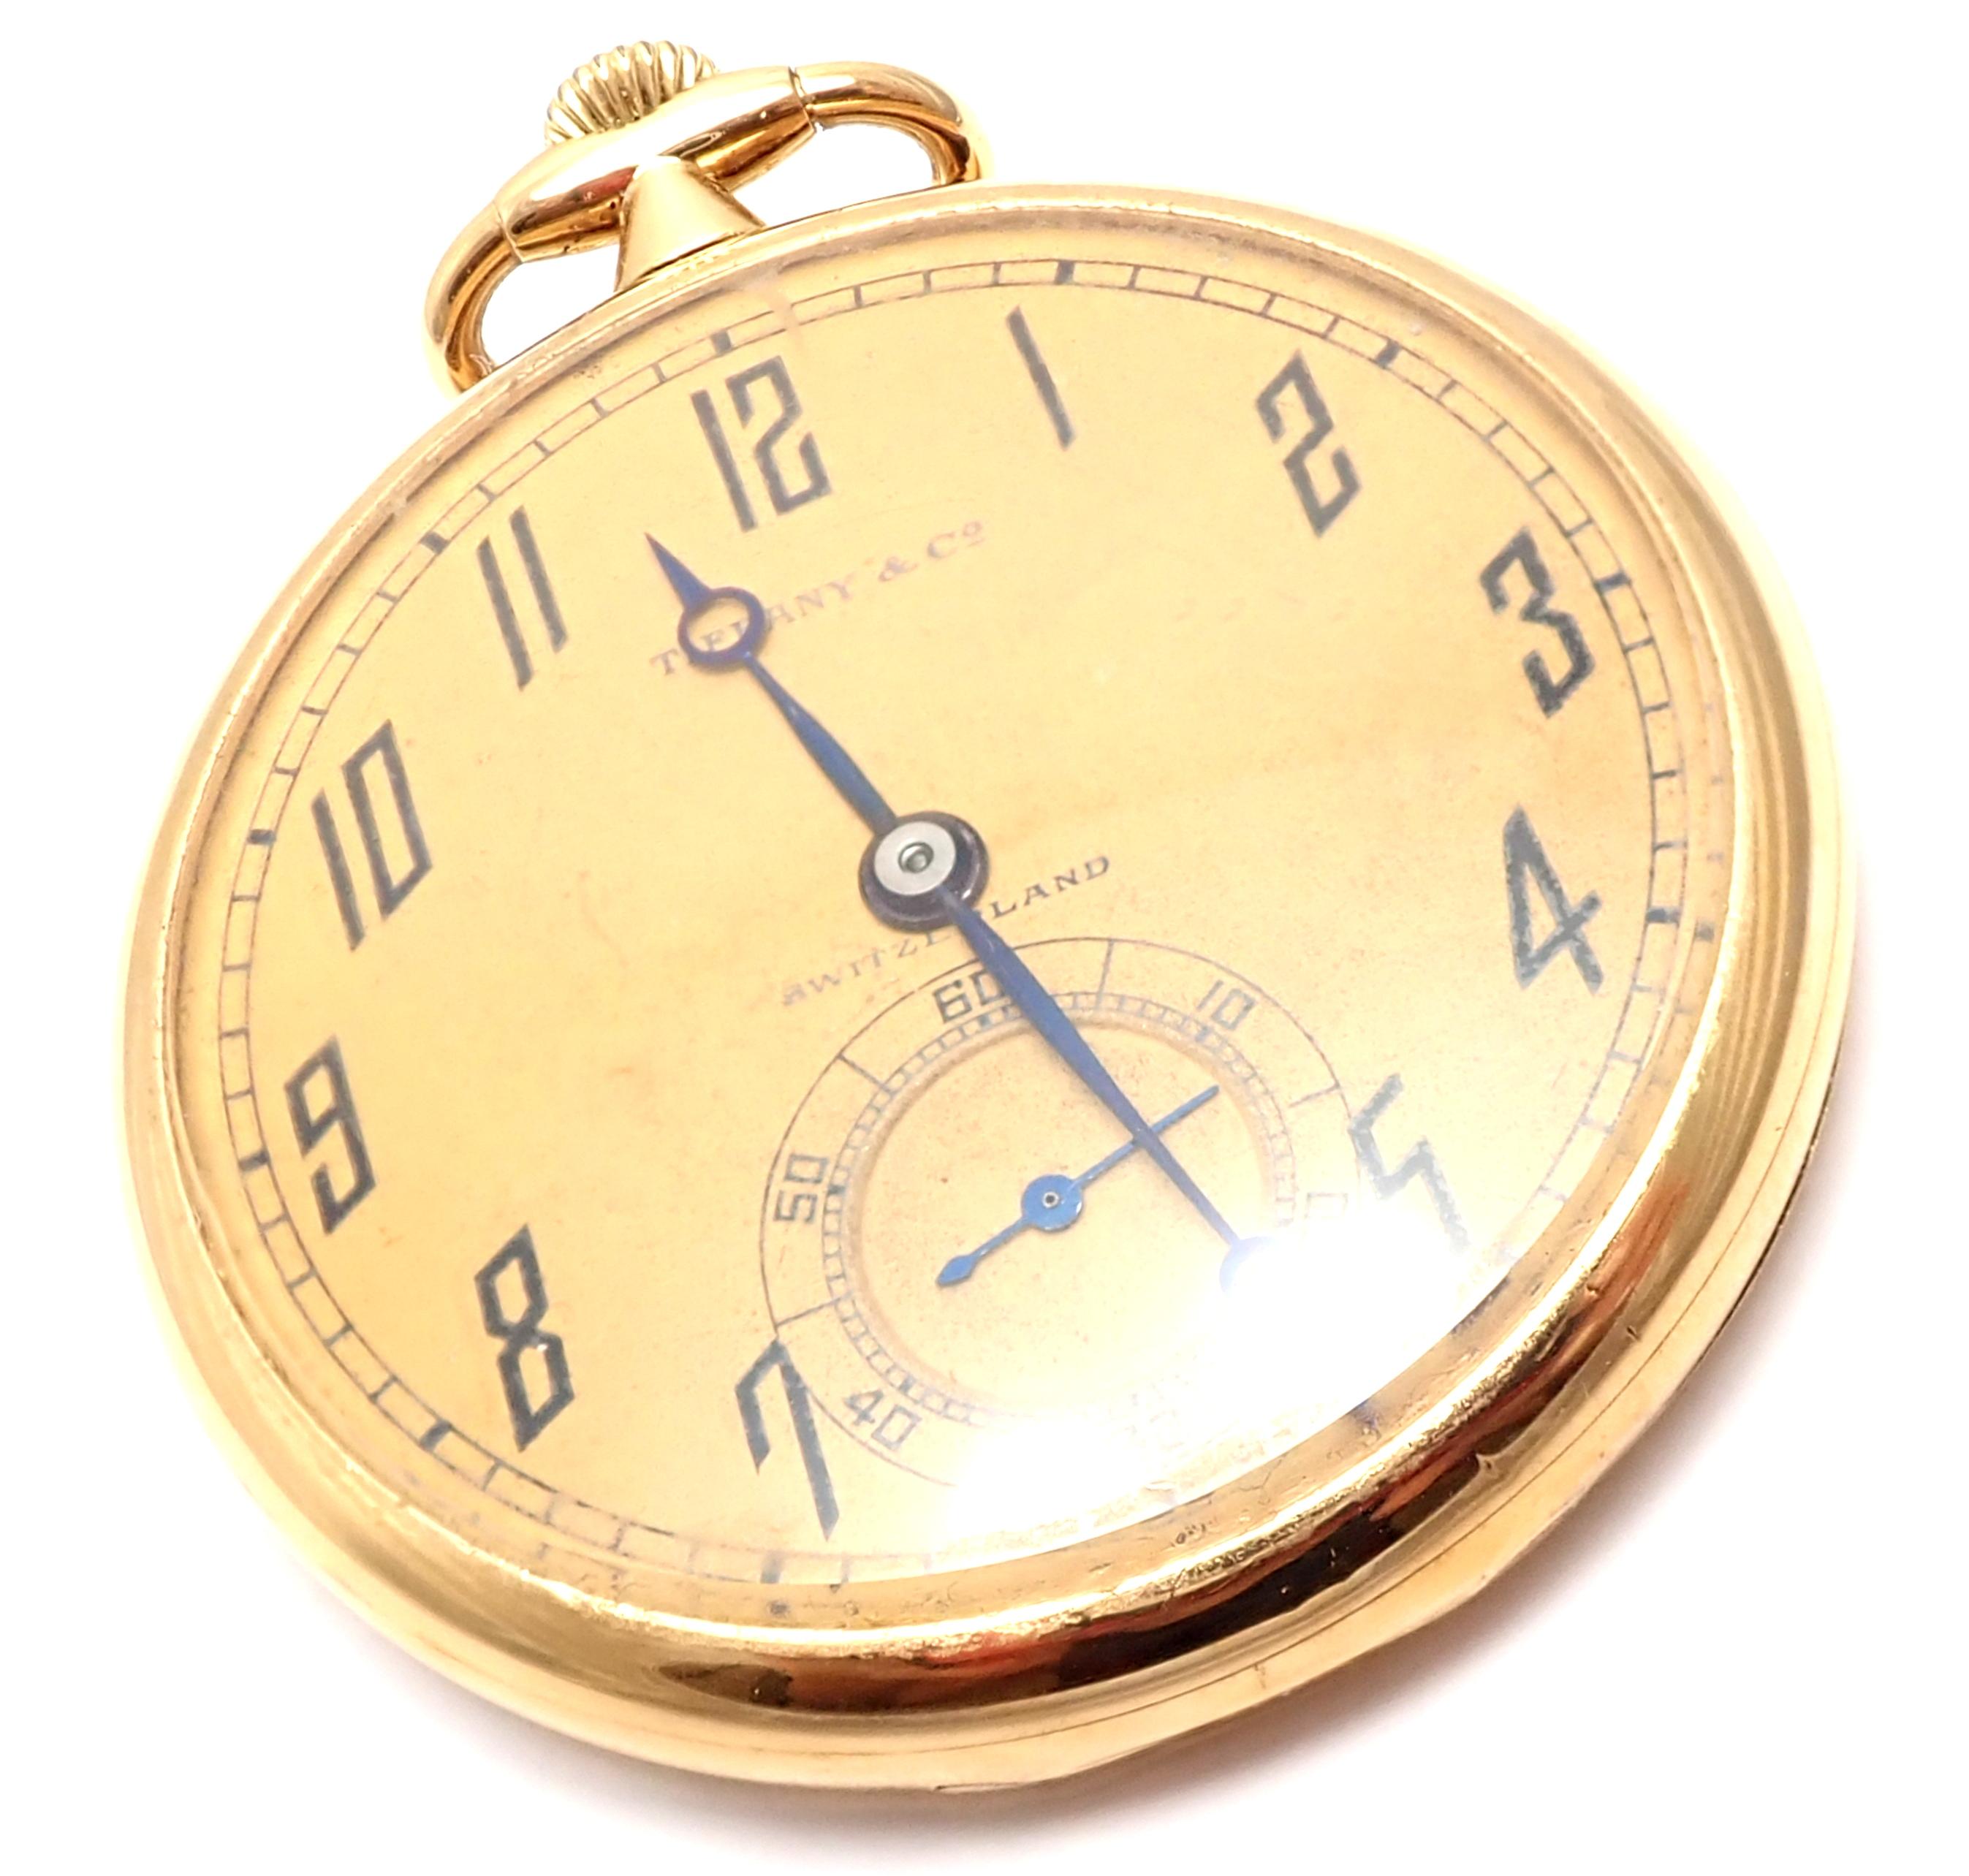 18k Yellow Gold 44mm Pocket Watch by Agassiz W & Co Made For Tiffany & Co. 
Details: 
Case Size: 44mm
Weight: 53.8 grams
Movement: Mechanical Hand Winding
Stamped Hallmarks: Dial: Tiffany & Co.
Inner Back Lid: Made For Tiffany & Co 
By Agassiz Watch